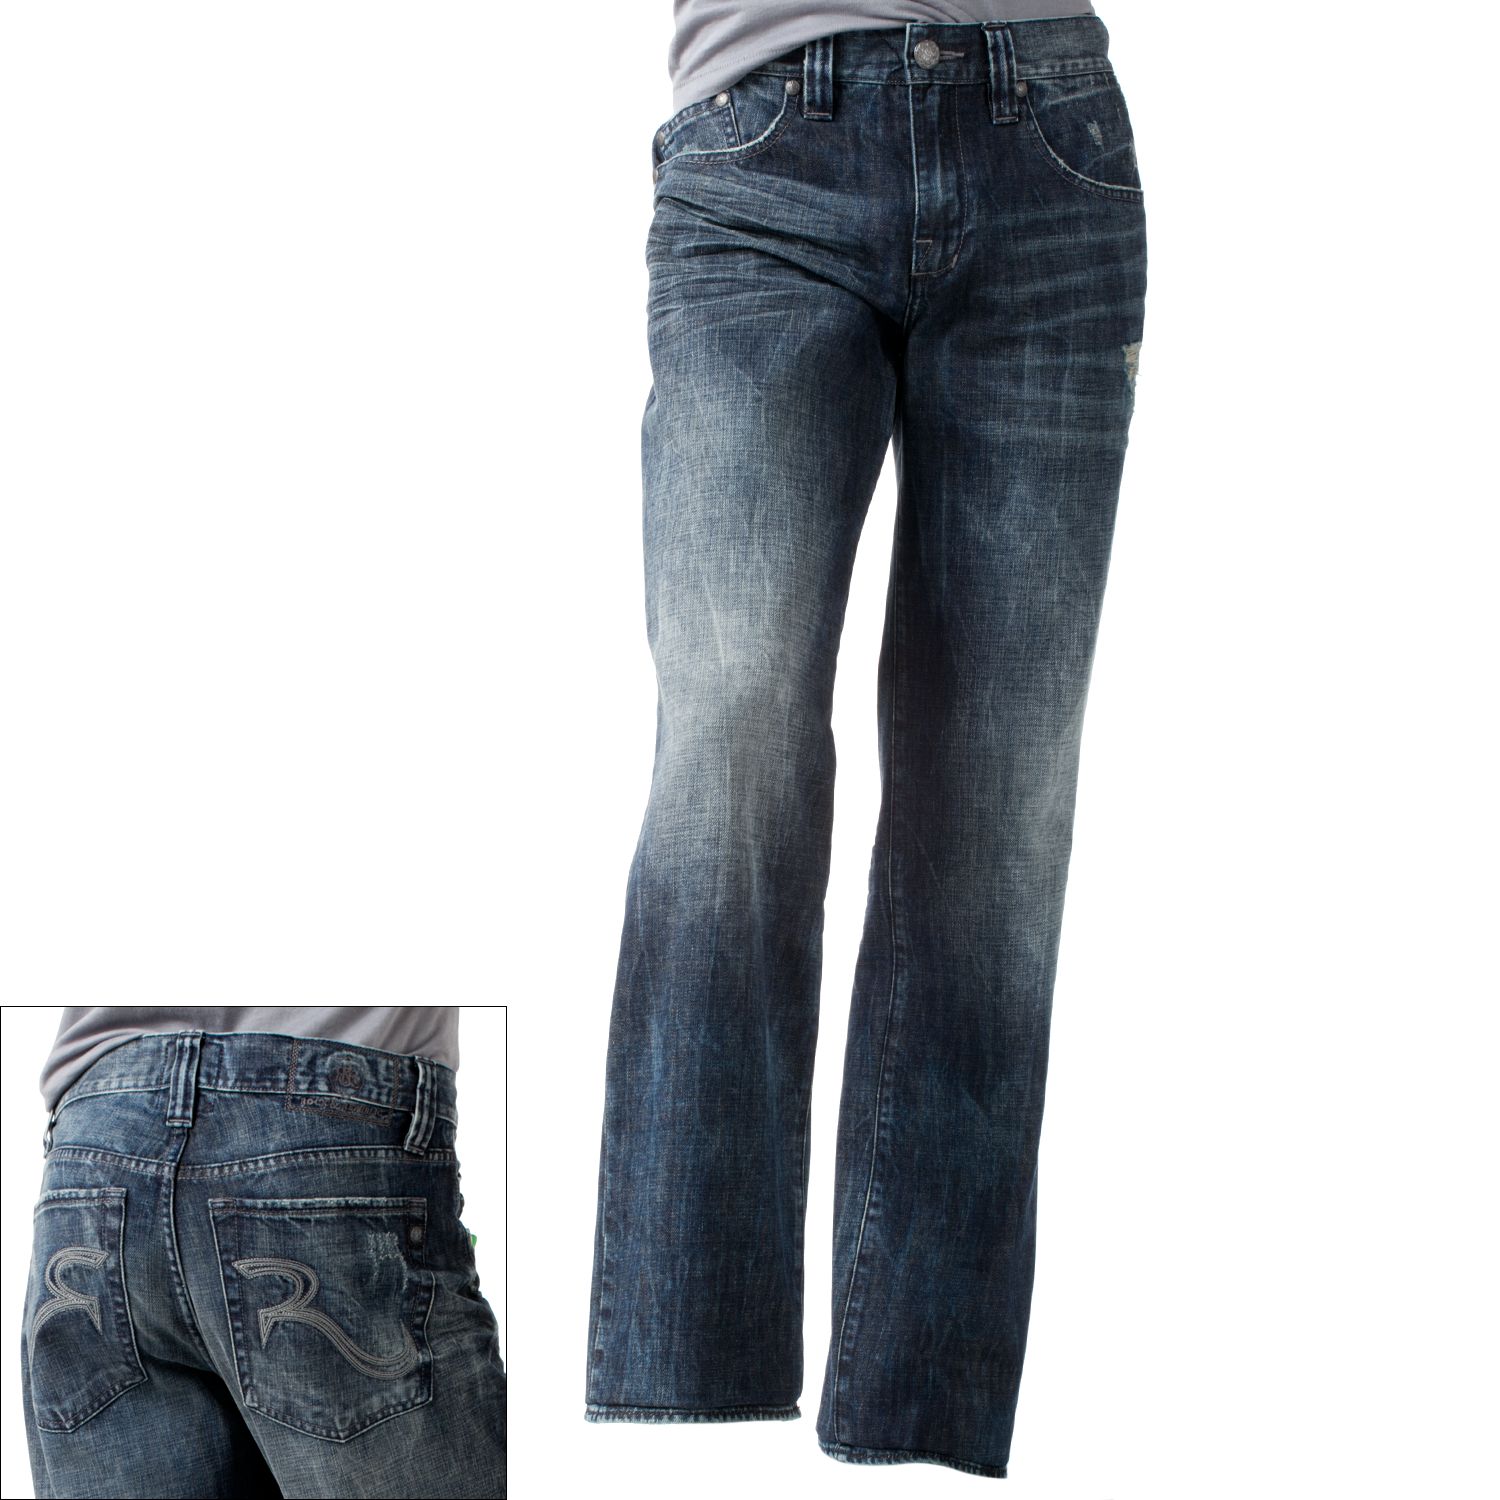 rock and republic jeans mens